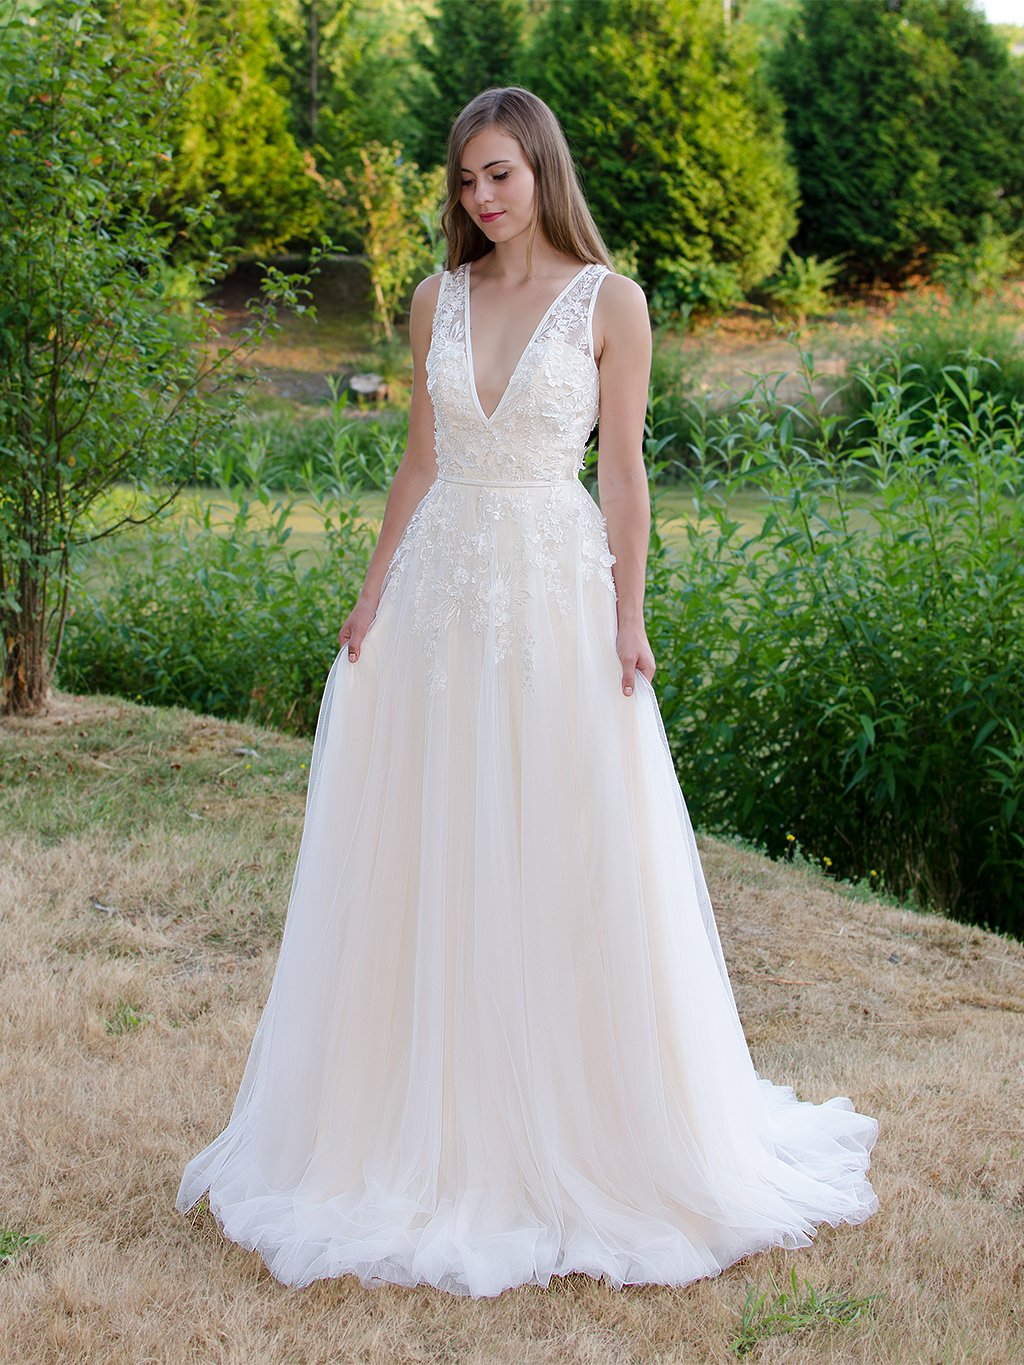 Sleeveless lace wedding dress with tulle skirts